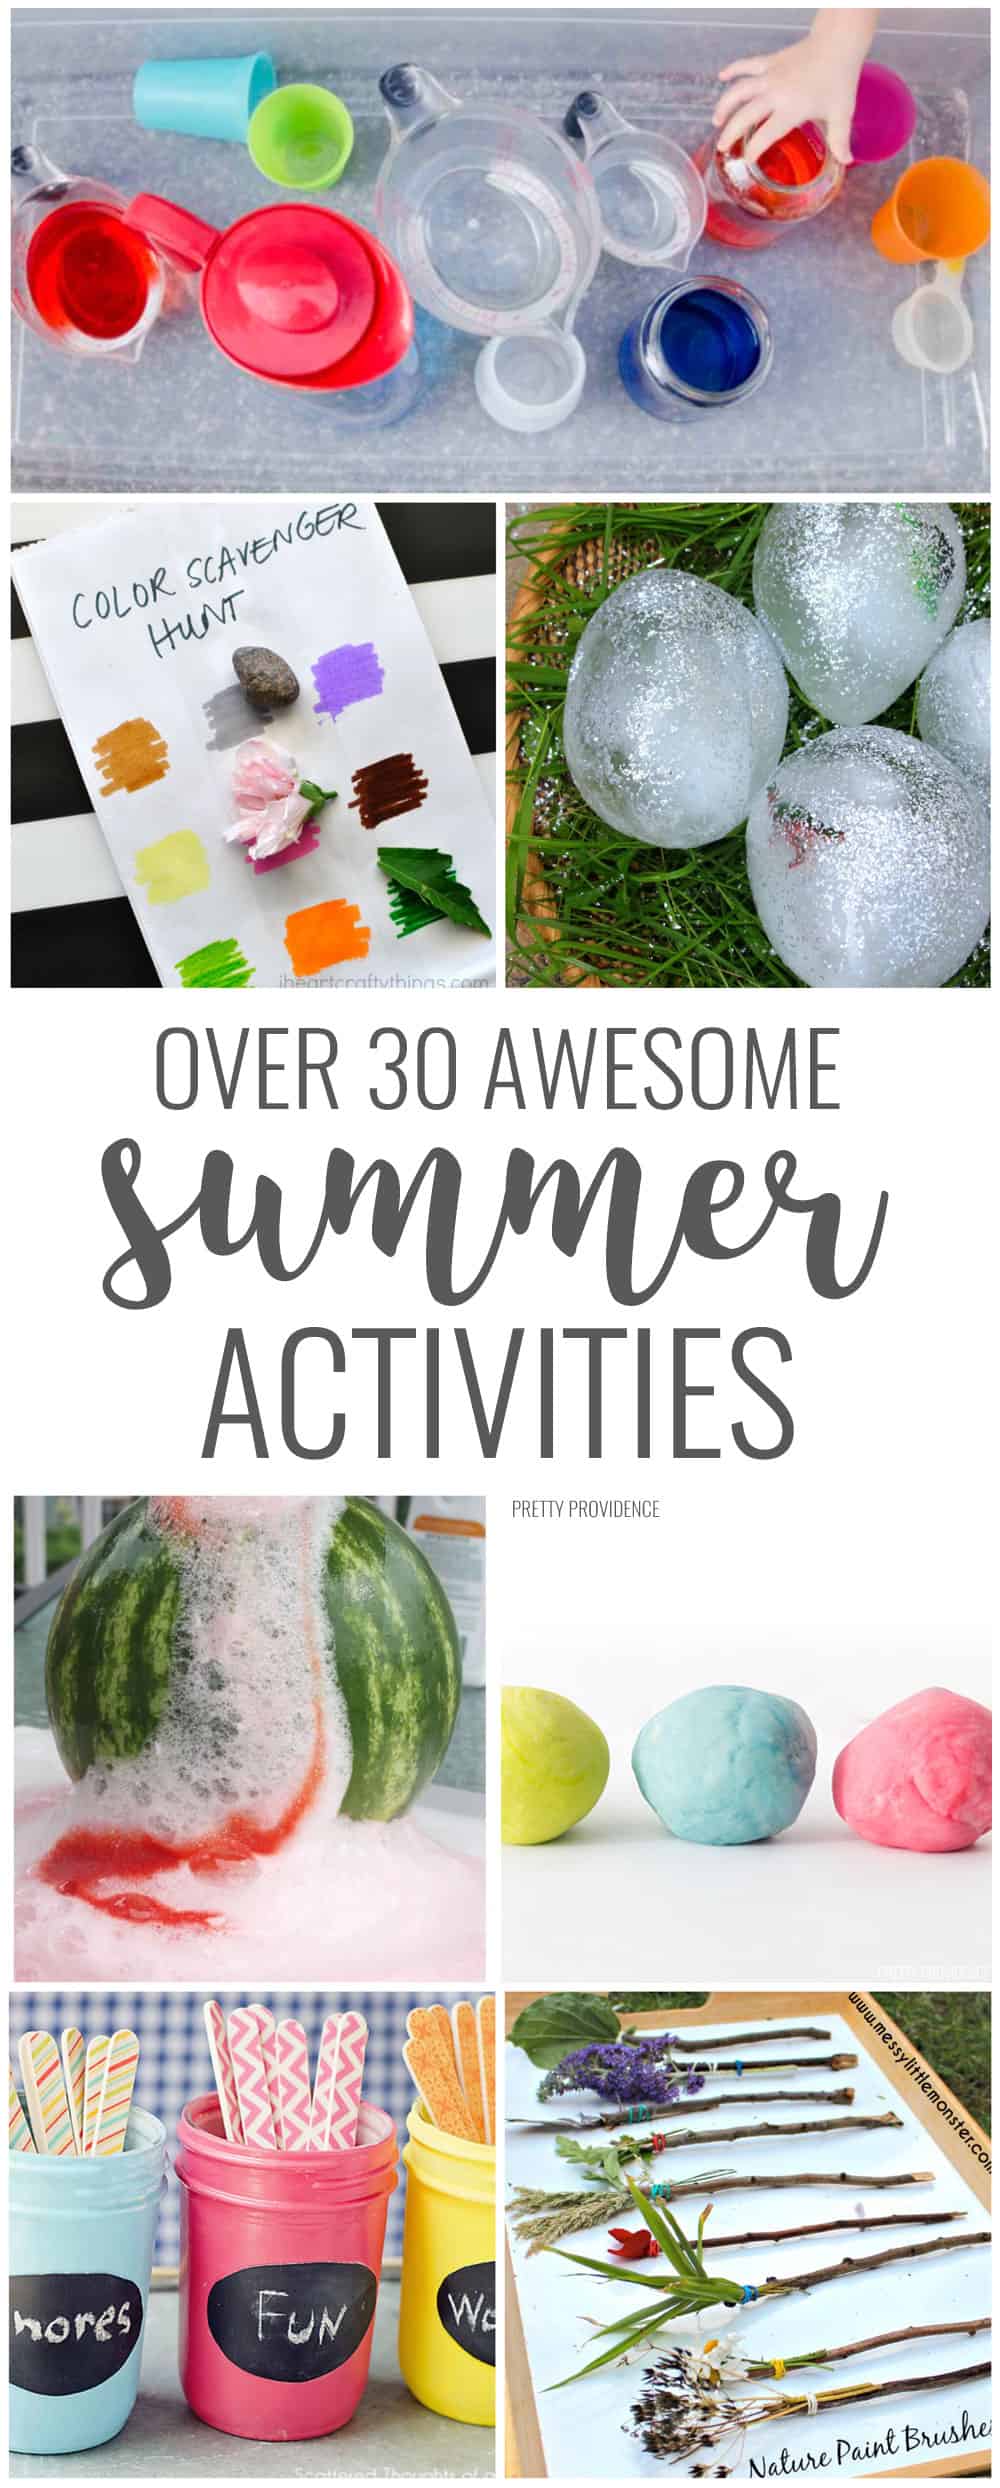 Fun Summer activities to keep boredom at bay! Creative activities, fun ways to cool-off, games and more!